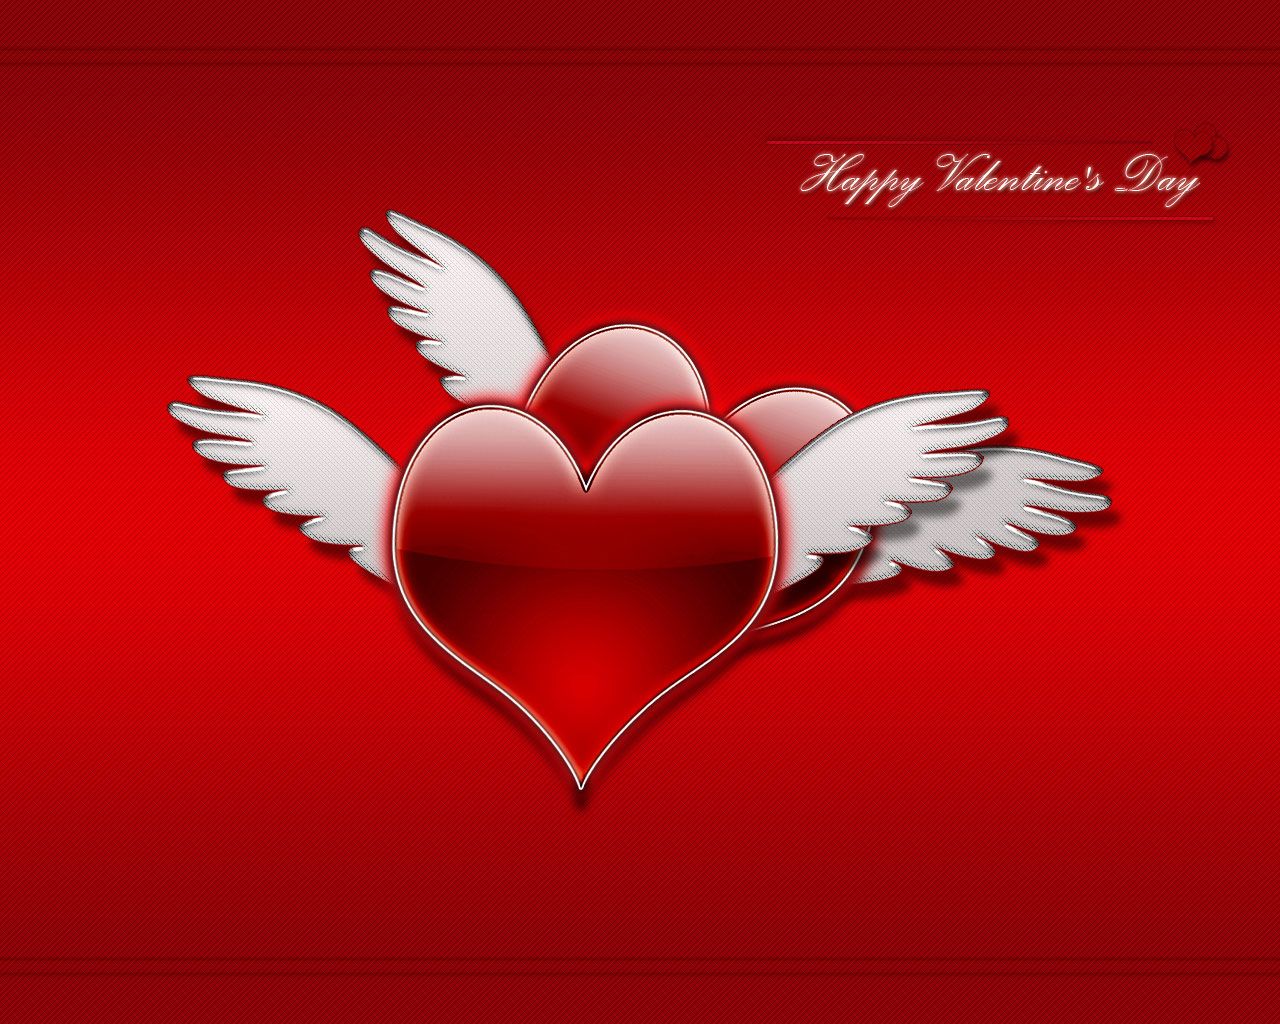 Two Heart With Wings, Download Photo, Desktop Wallpapers, - Happy Valentines Day Angels - HD Wallpaper 